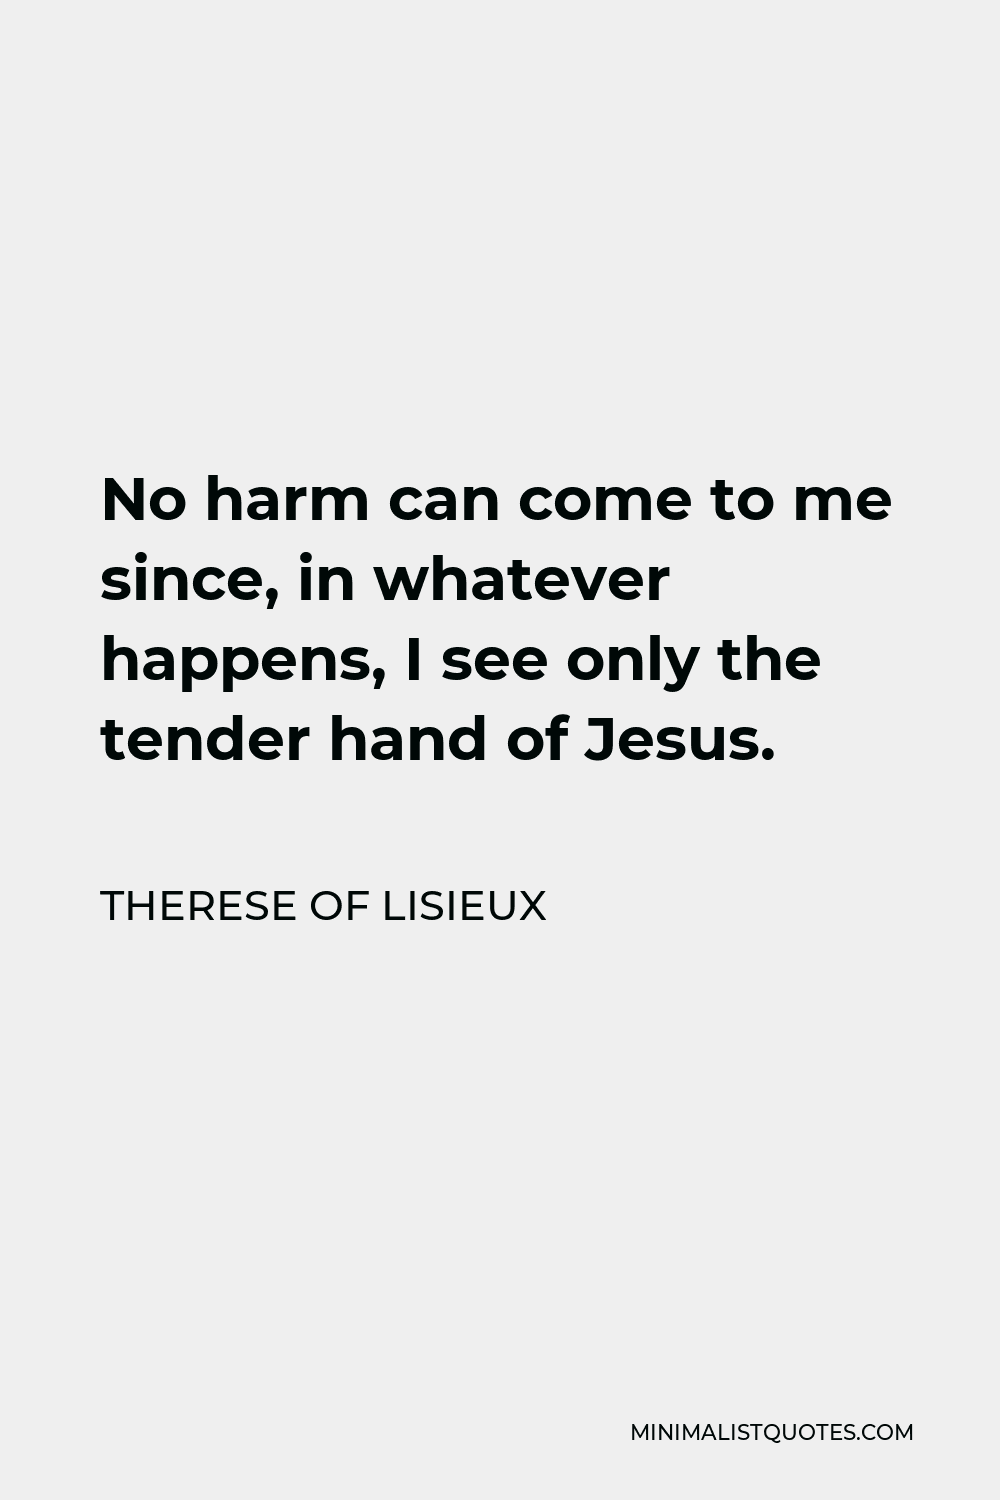 Therese of Lisieux Quote - No harm can come to me since, in whatever happens, I see only the tender hand of Jesus.